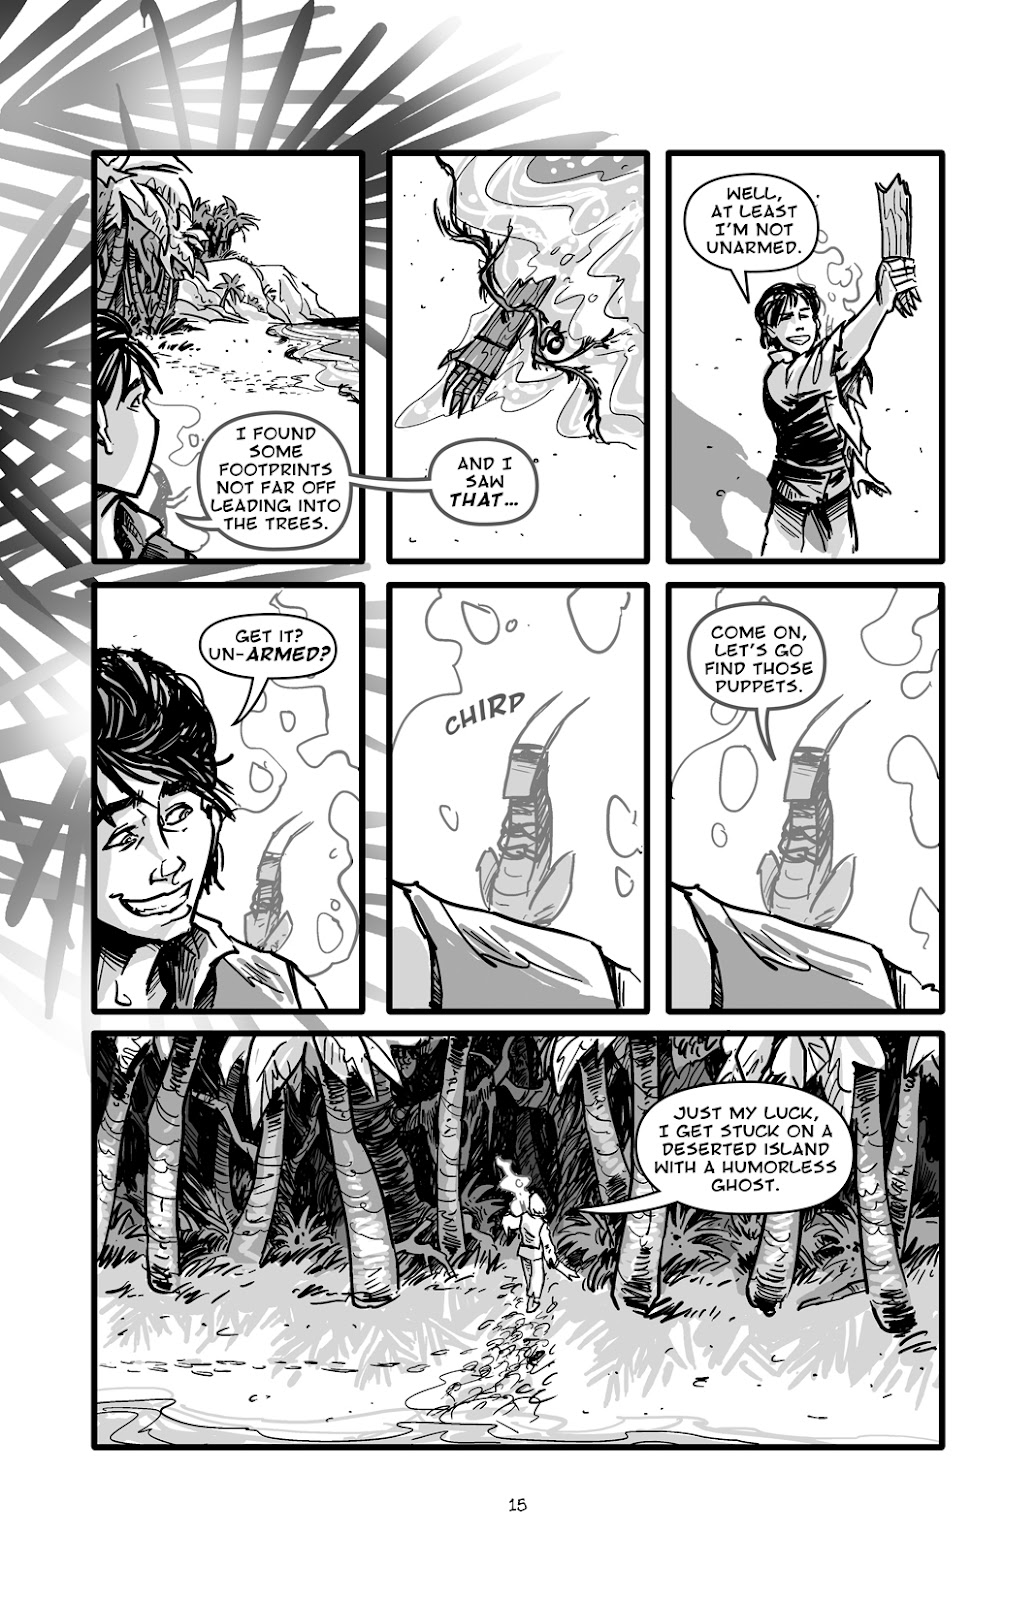 Pinocchio: Vampire Slayer - Of Wood and Blood issue 1 - Page 16